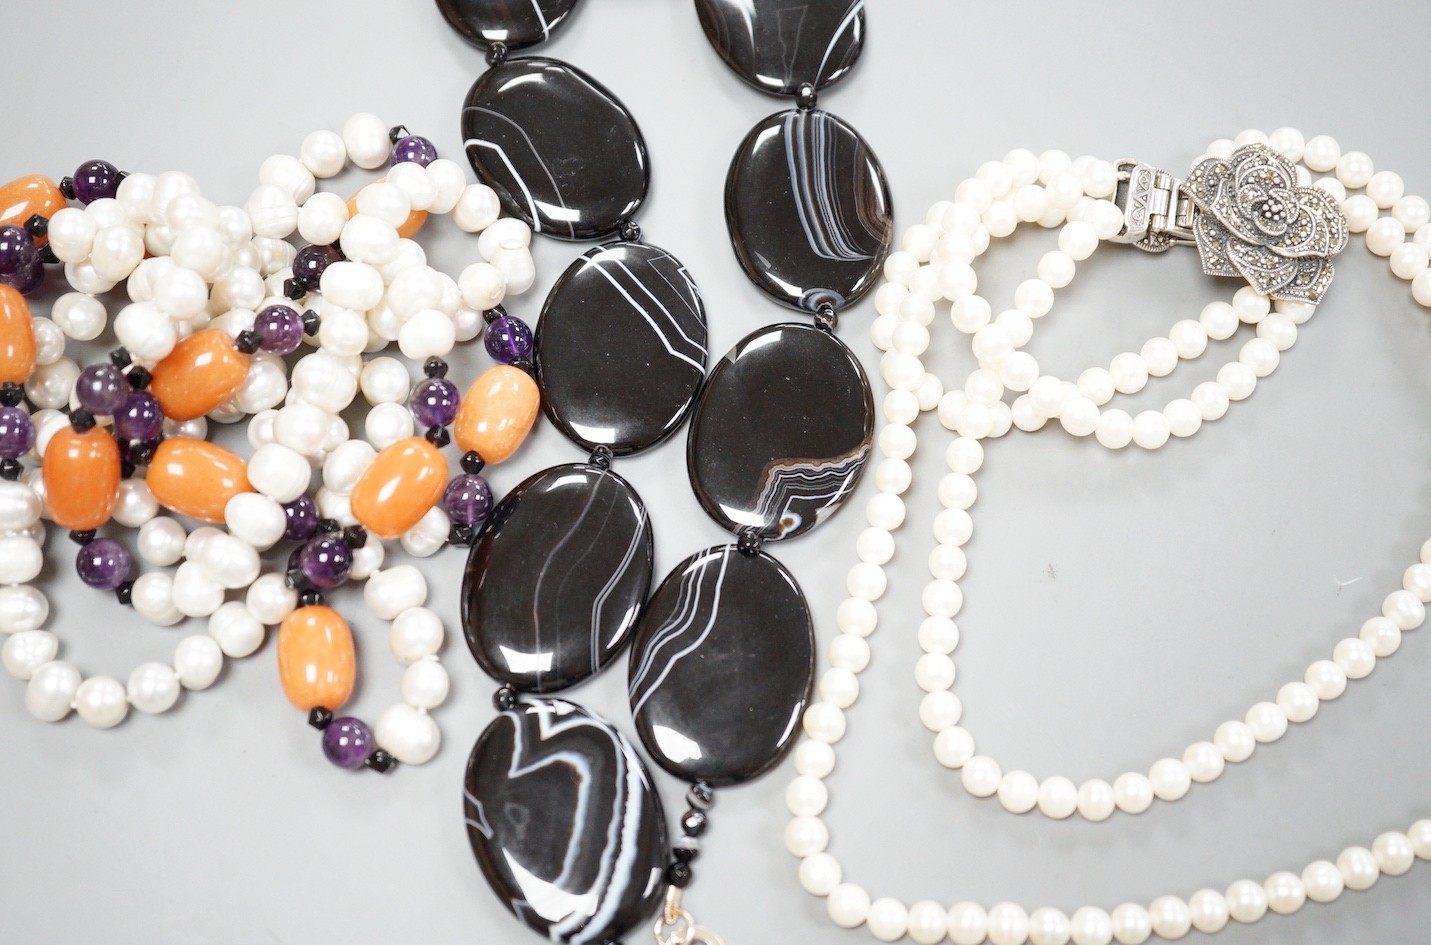 A double strand freshwater pearl necklace, with marcasite set clasp, a banded black agate necklace with 925 clasp and freshwater pearl, amethyst and agate set necklace.